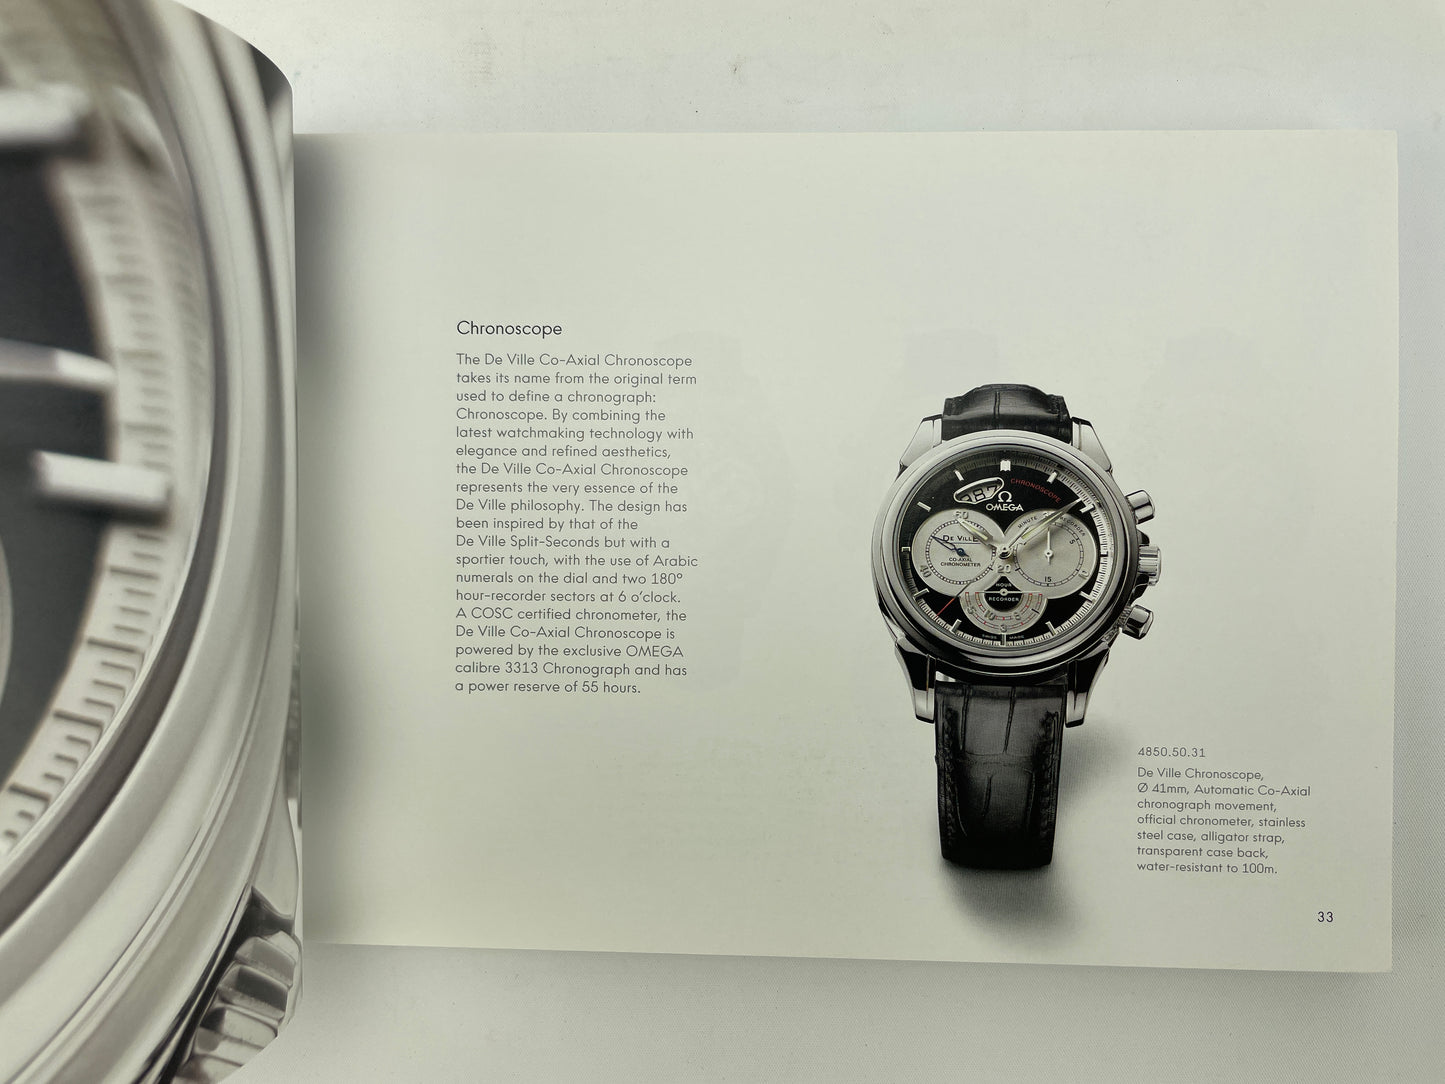 Omega Wristwatch 2007 Collection Catalog